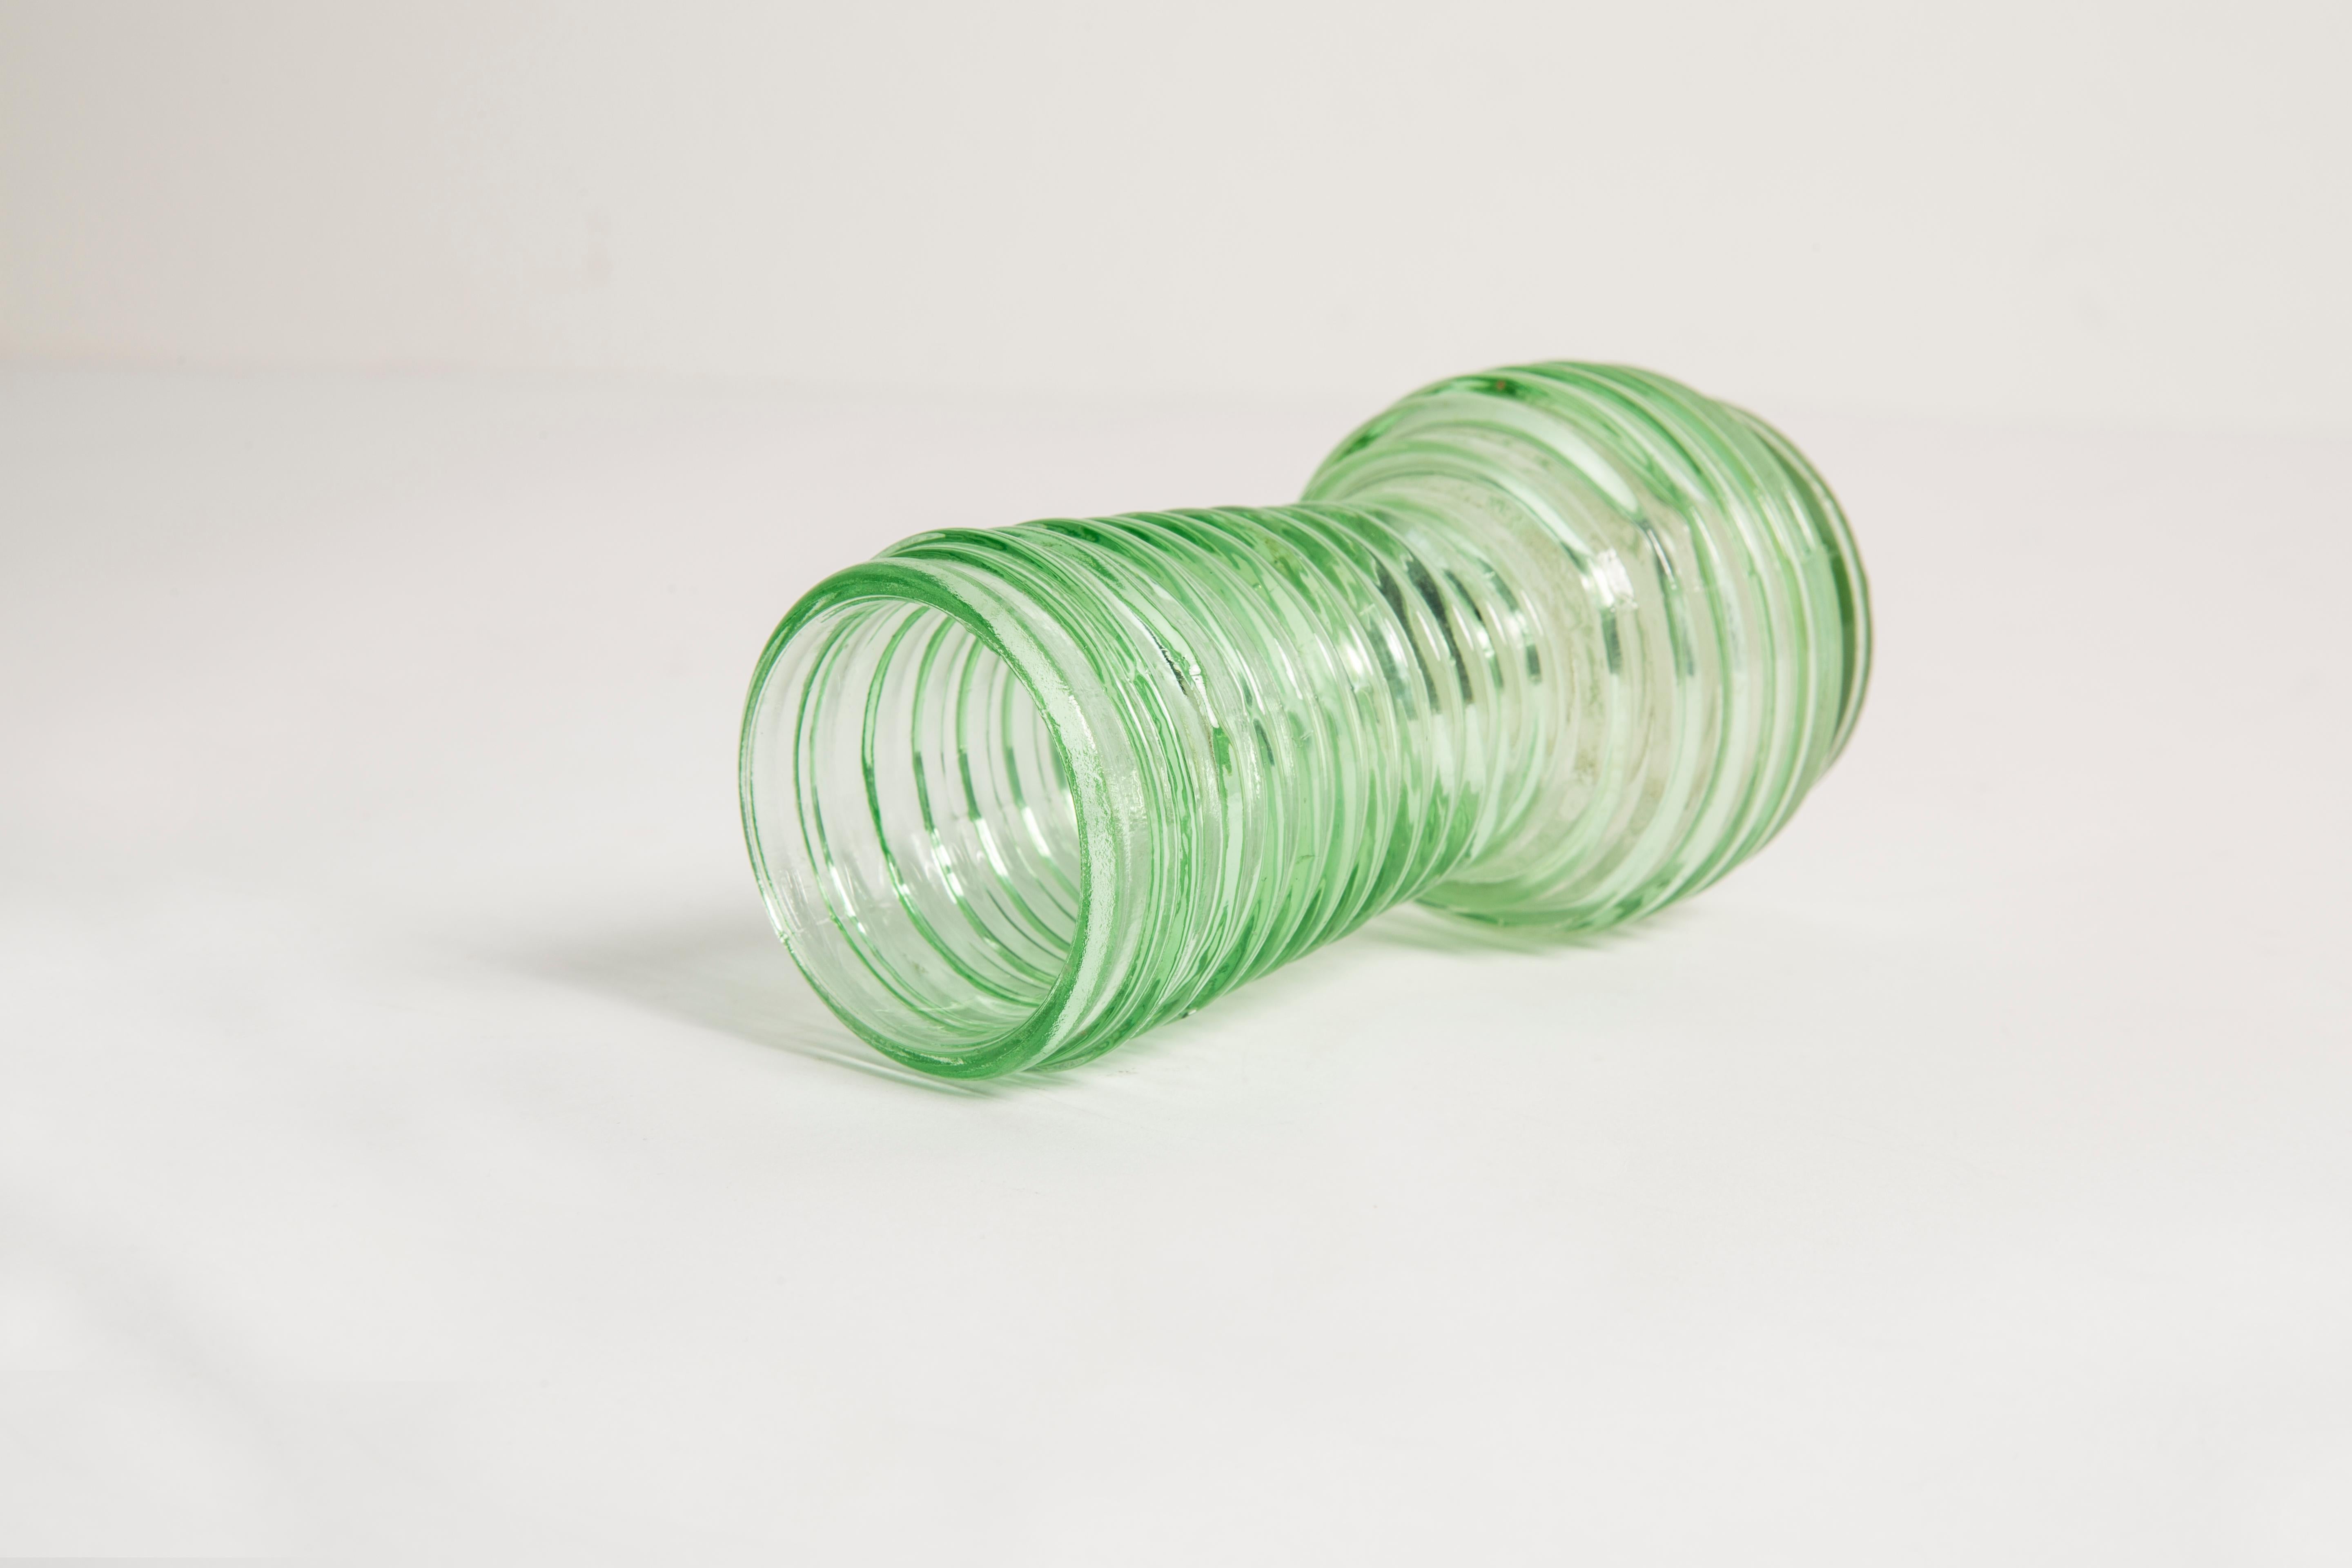 Glass Midcentury Vintage Green Small Geometric Vase, Europe, 1960s For Sale